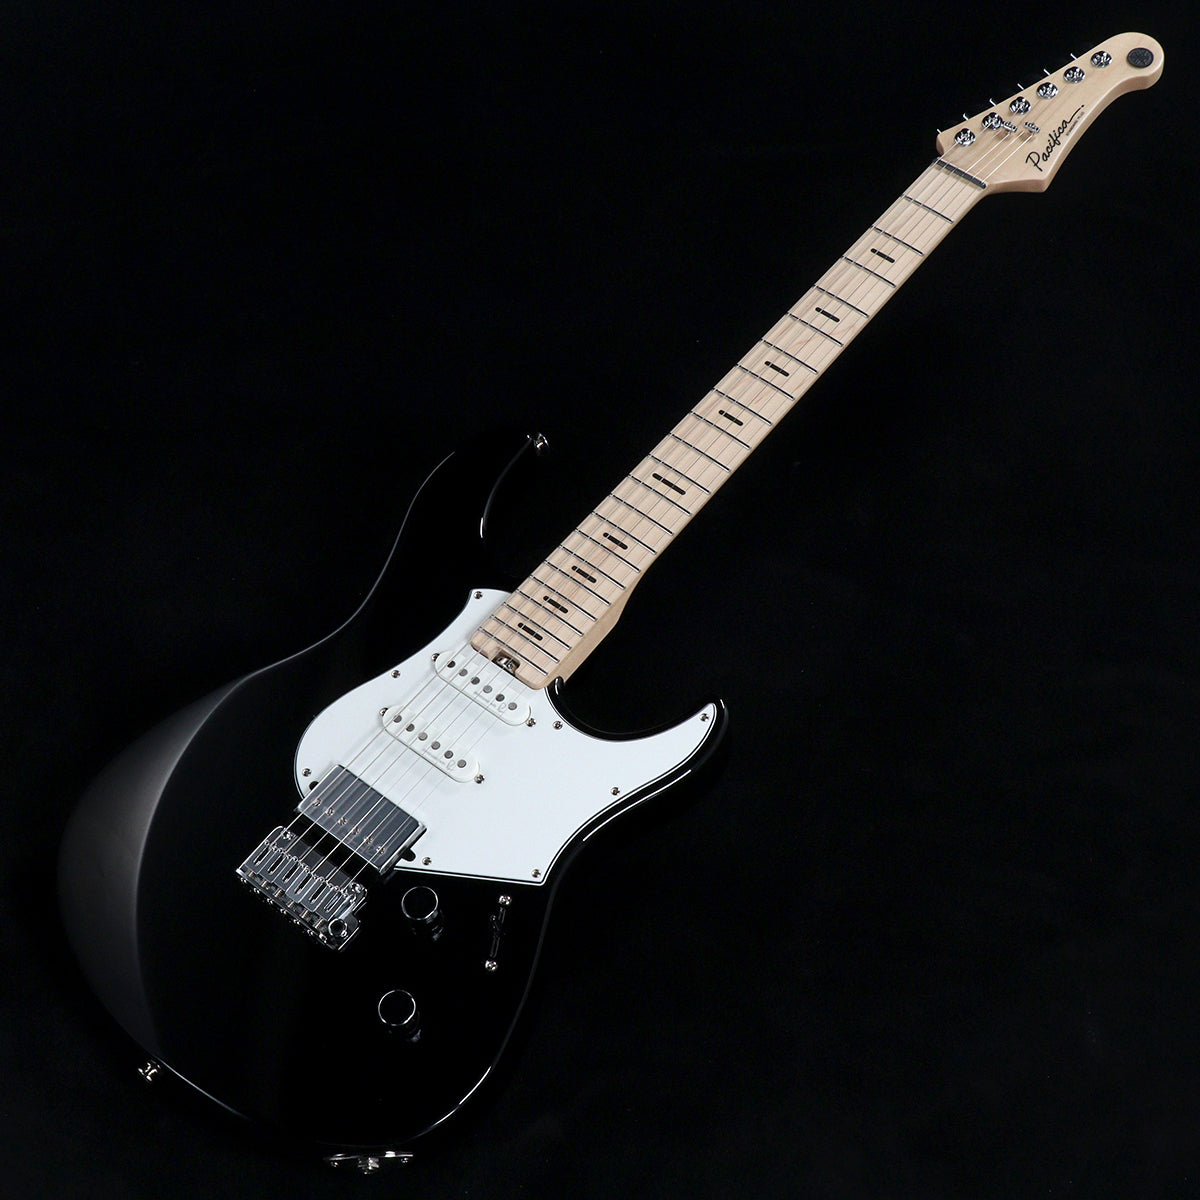 [SN IJX253412] YAMAHA / Pacifica Standard Plus - PACS+12MBL Black Maple Fingerboard(Weight:3.63kg) [05]